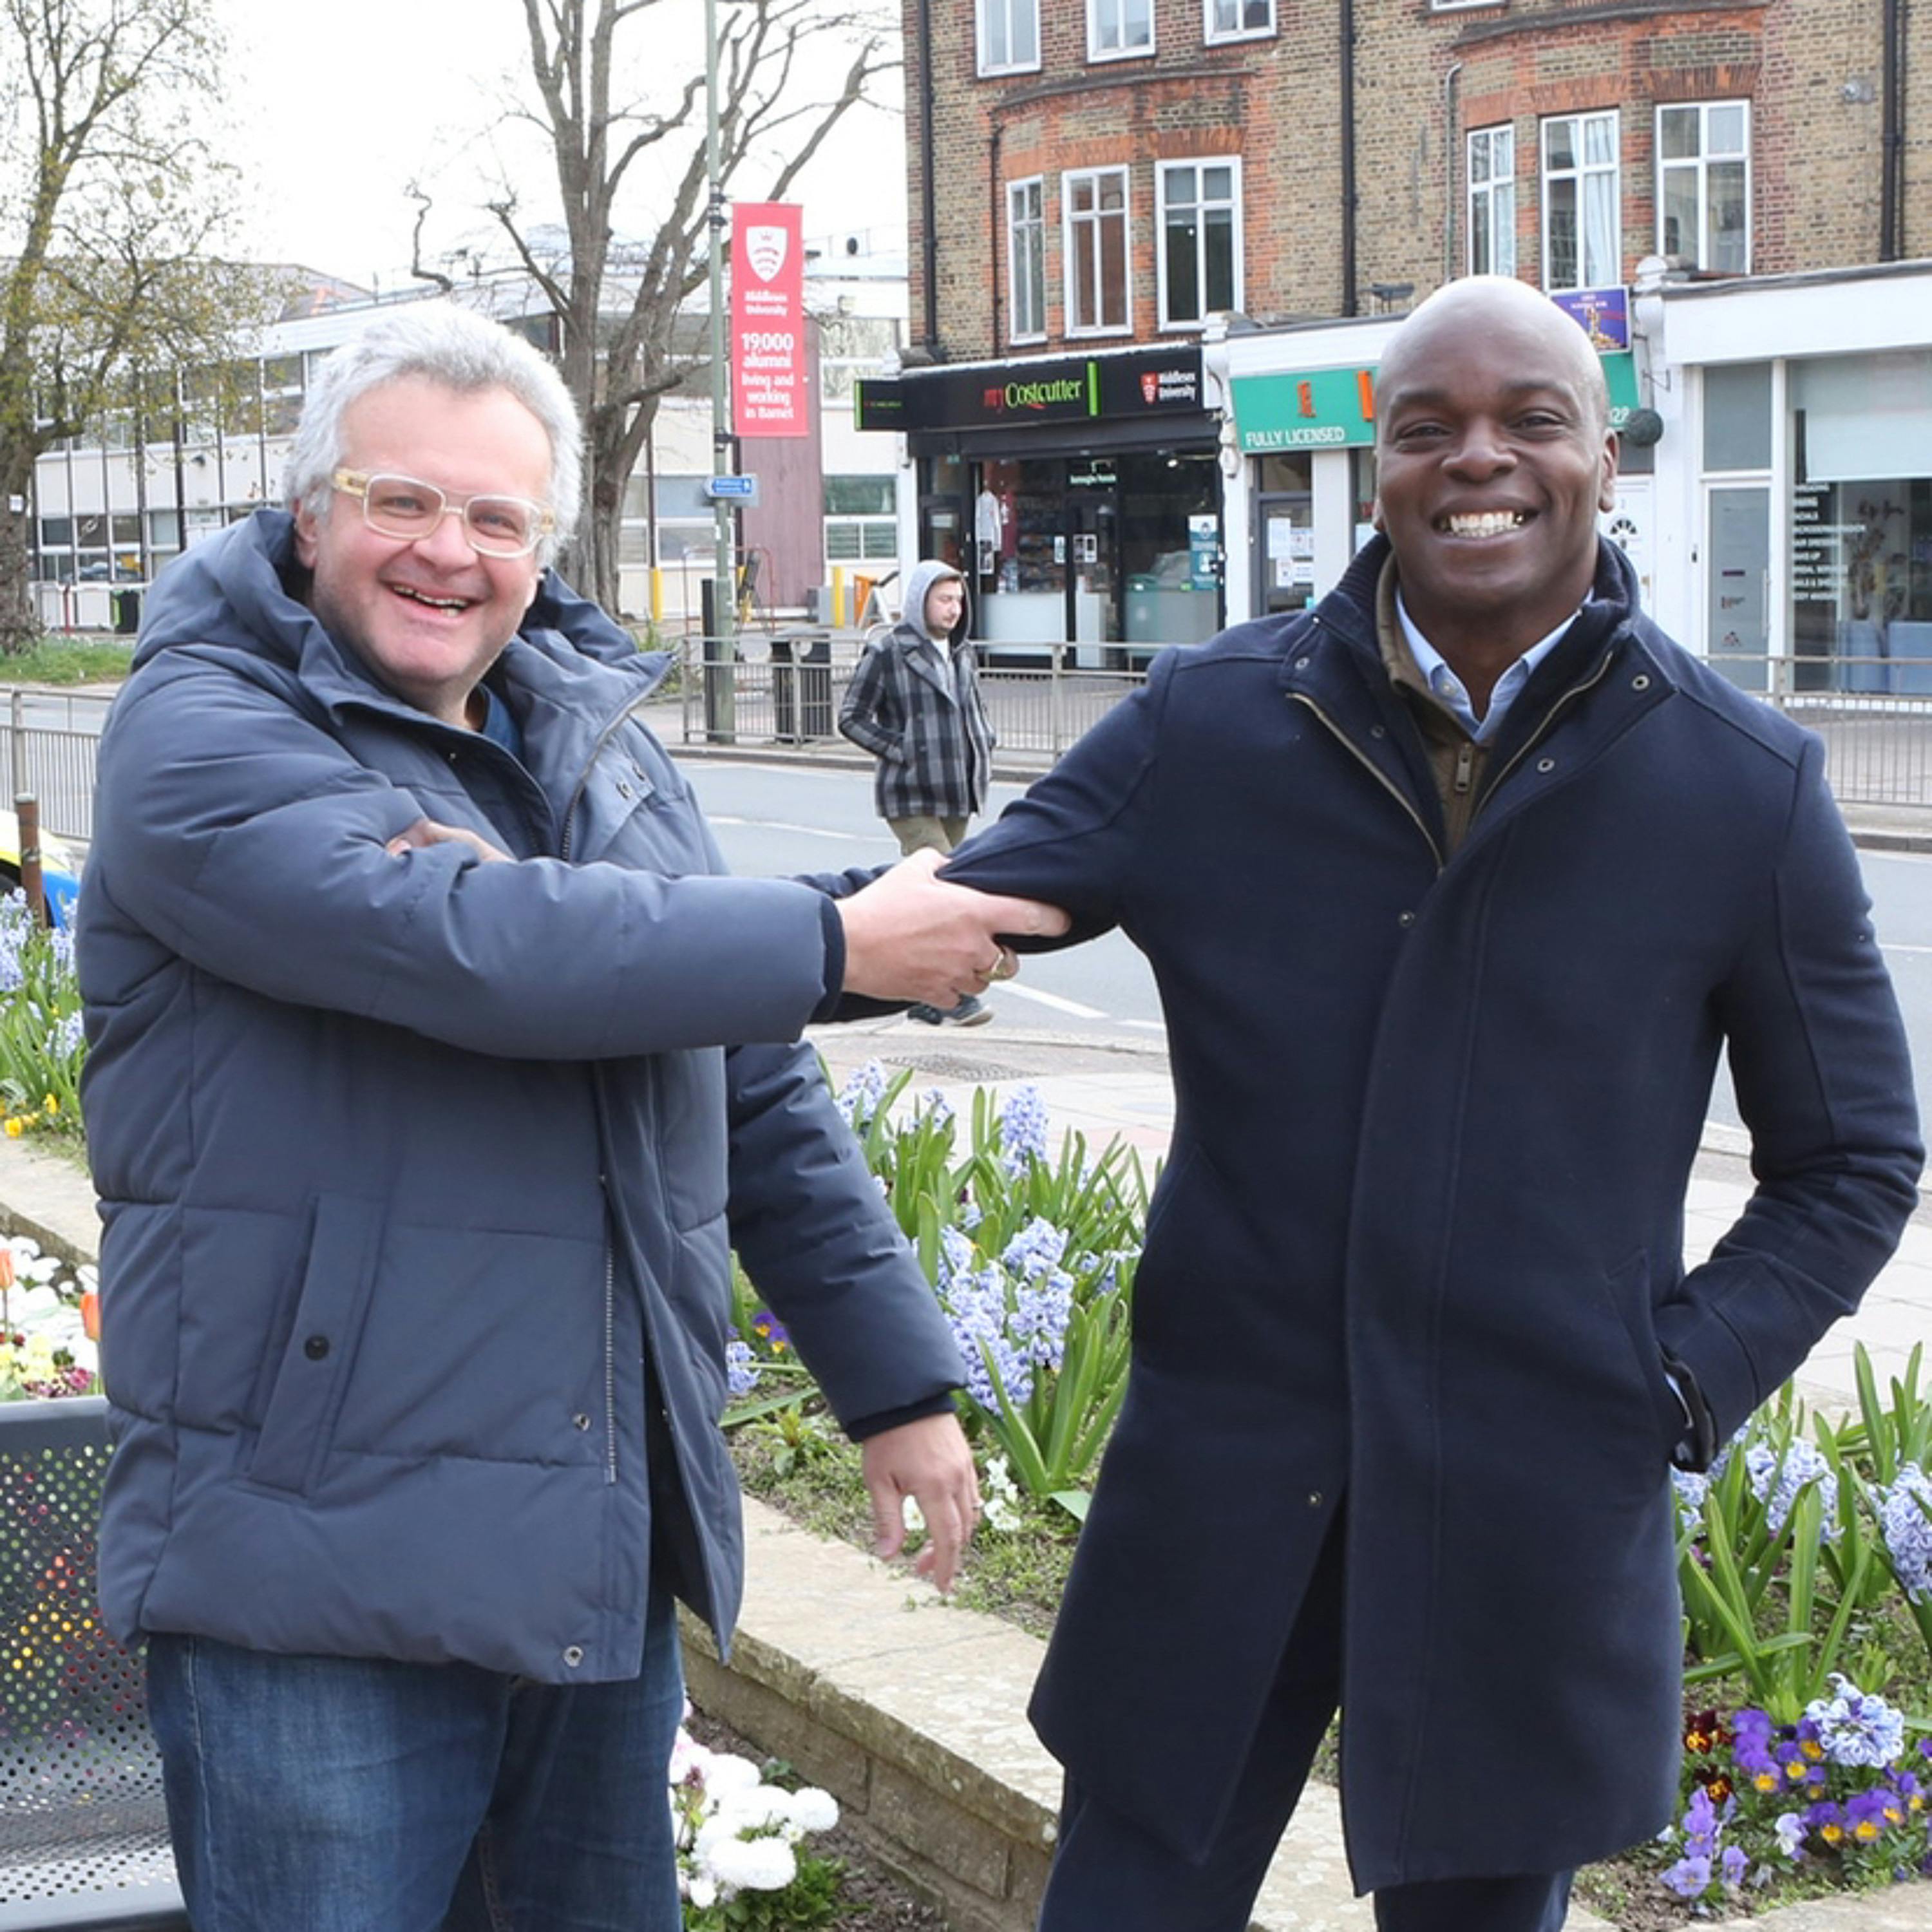 56: Shaun Bailey: Conservative candidate for London Mayor’s views on Israel and Jewish Londoners